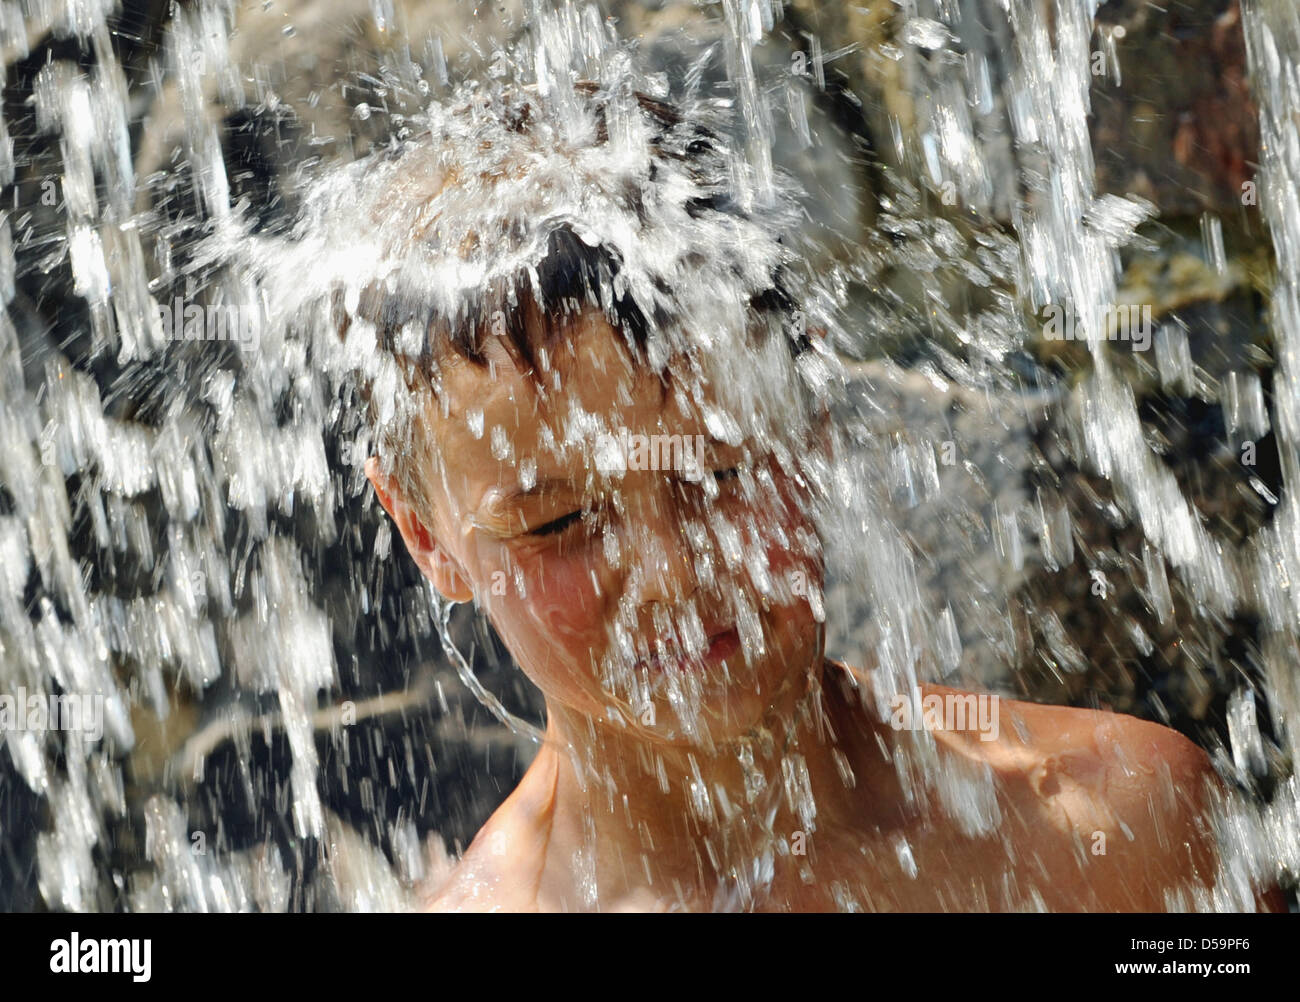 Ten-year-old Cedrik from Marburg is cooling off under a waterfall at the Edersee barrier wall near Edertal, Germany, 29 June 2010. The summer's first heat wave rolls over Hesse. In certain parts, temperatures are expected to reach 35 degrees. There is a risk of lightnung summer storms. Photo: Uwe Zucchi Stock Photo